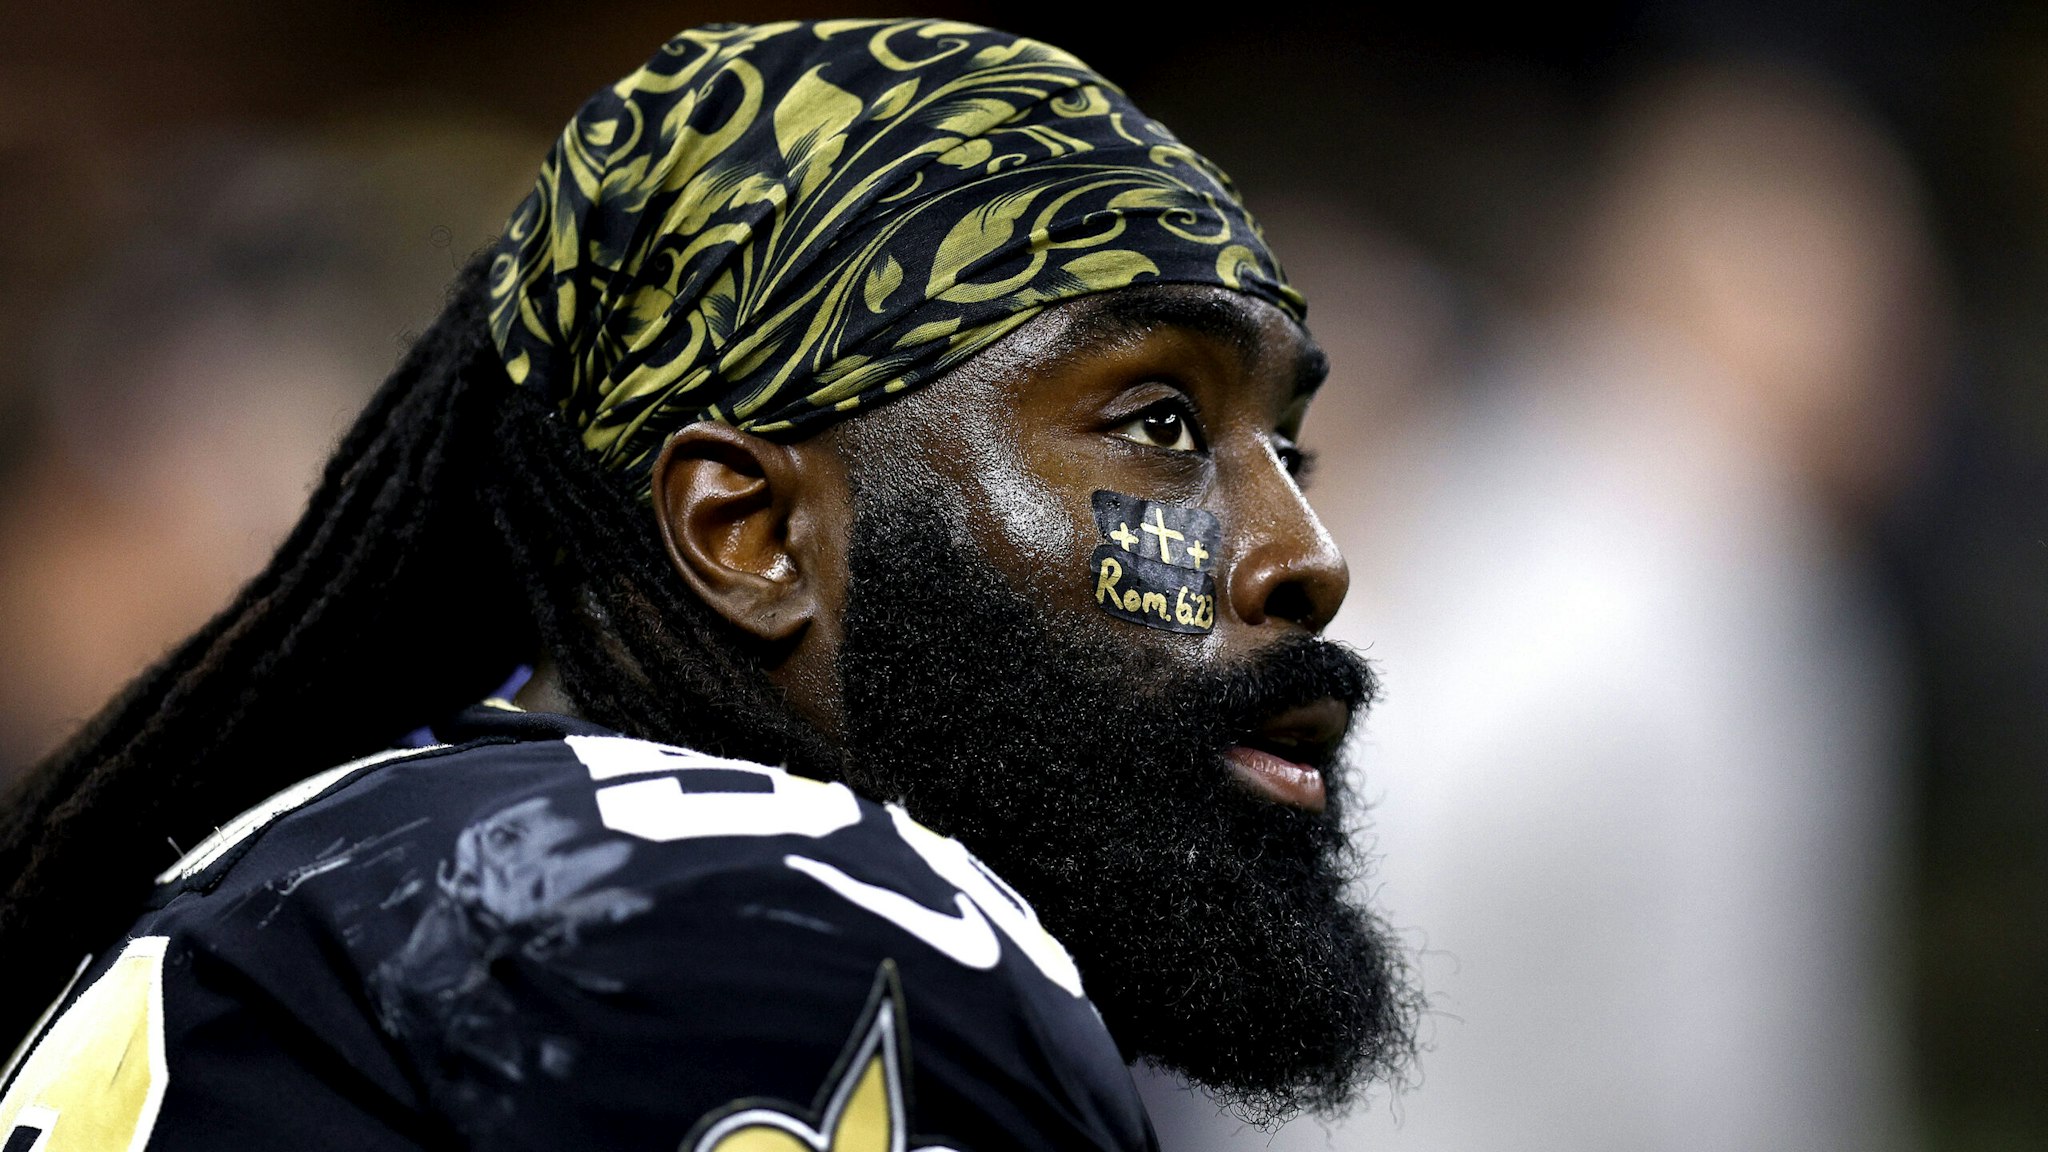 NEW ORLEANS, LOUISIANA - OCTOBER 30: Demario Davis #56 of the New Orleans Saints sits on the bench during an NFL game against the Las Vegas Raiders at Caesars Superdome on October 30, 2022 in New Orleans, Louisiana.